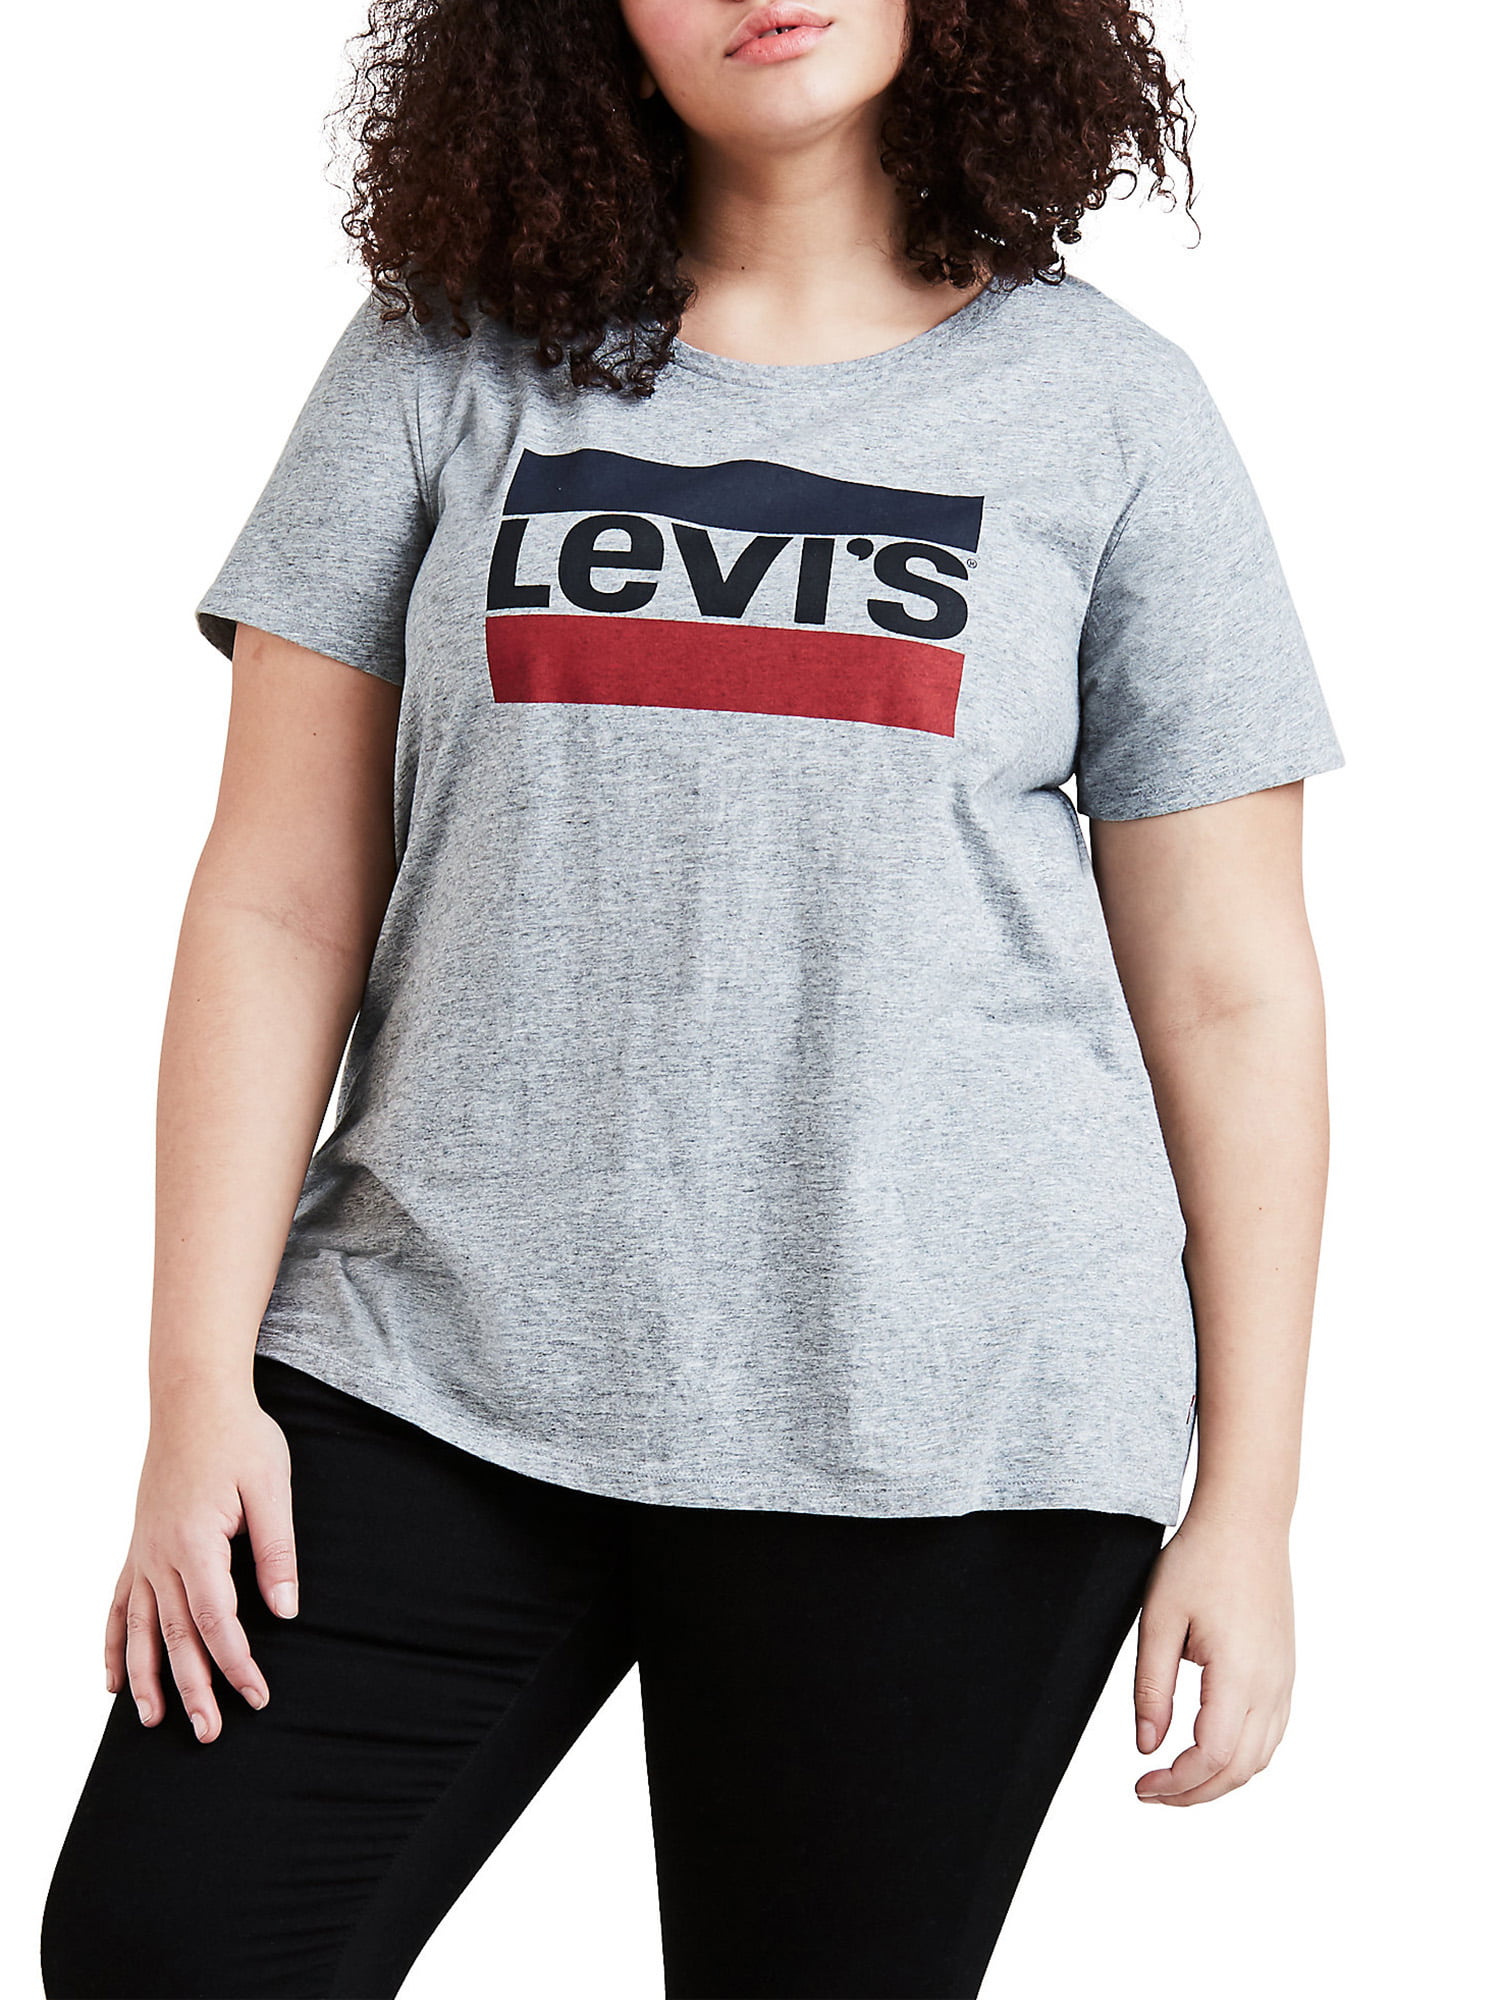 levis womens tees